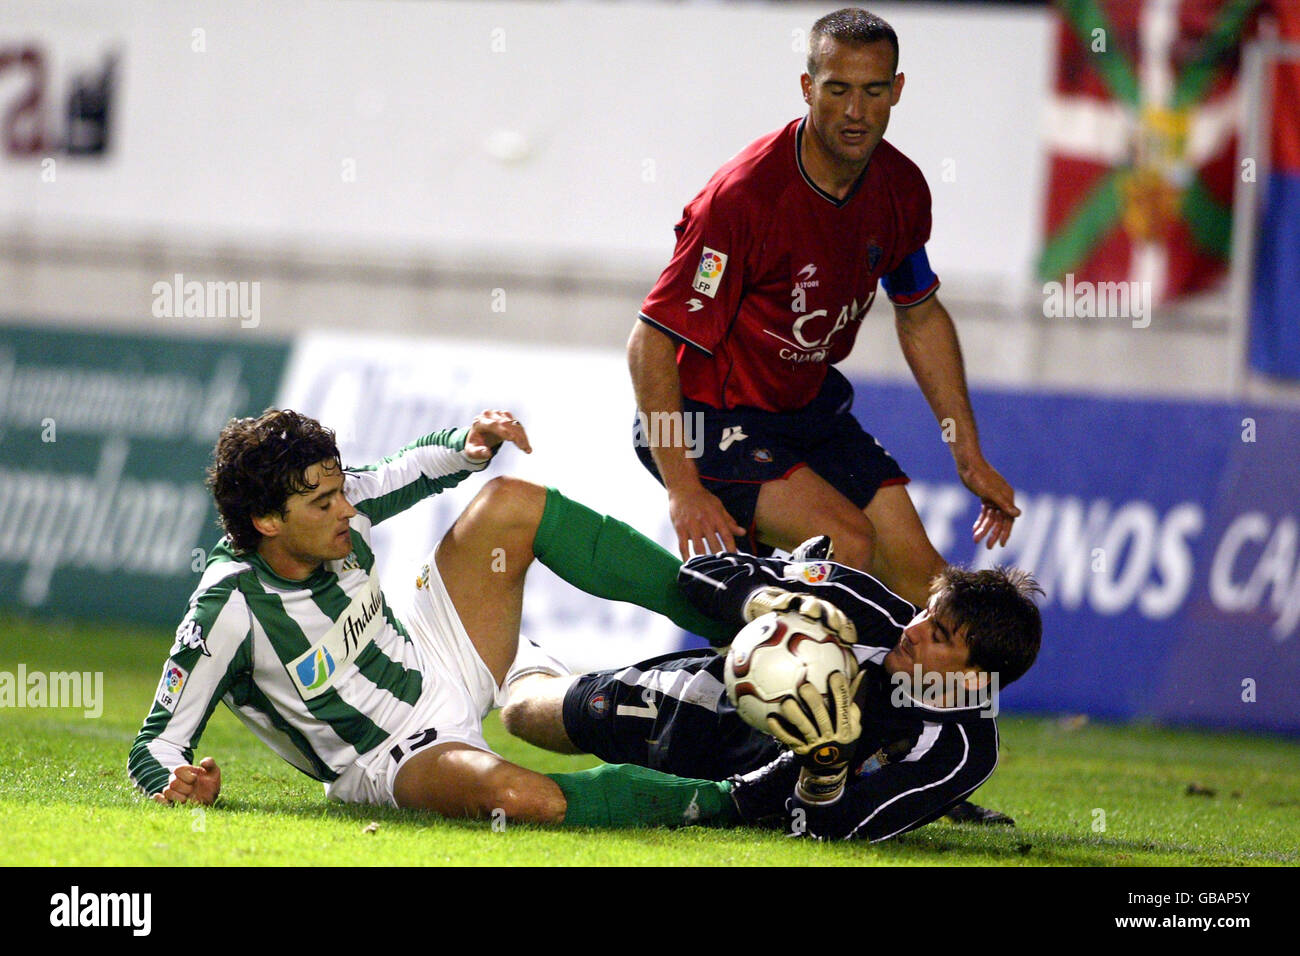 Osasuna's Jose Manuel Mateo watches his goalkeeper Ricardo Sanzol Goni challenge with Real Betis's Jorge Lopez Tote for the ball Stock Photo